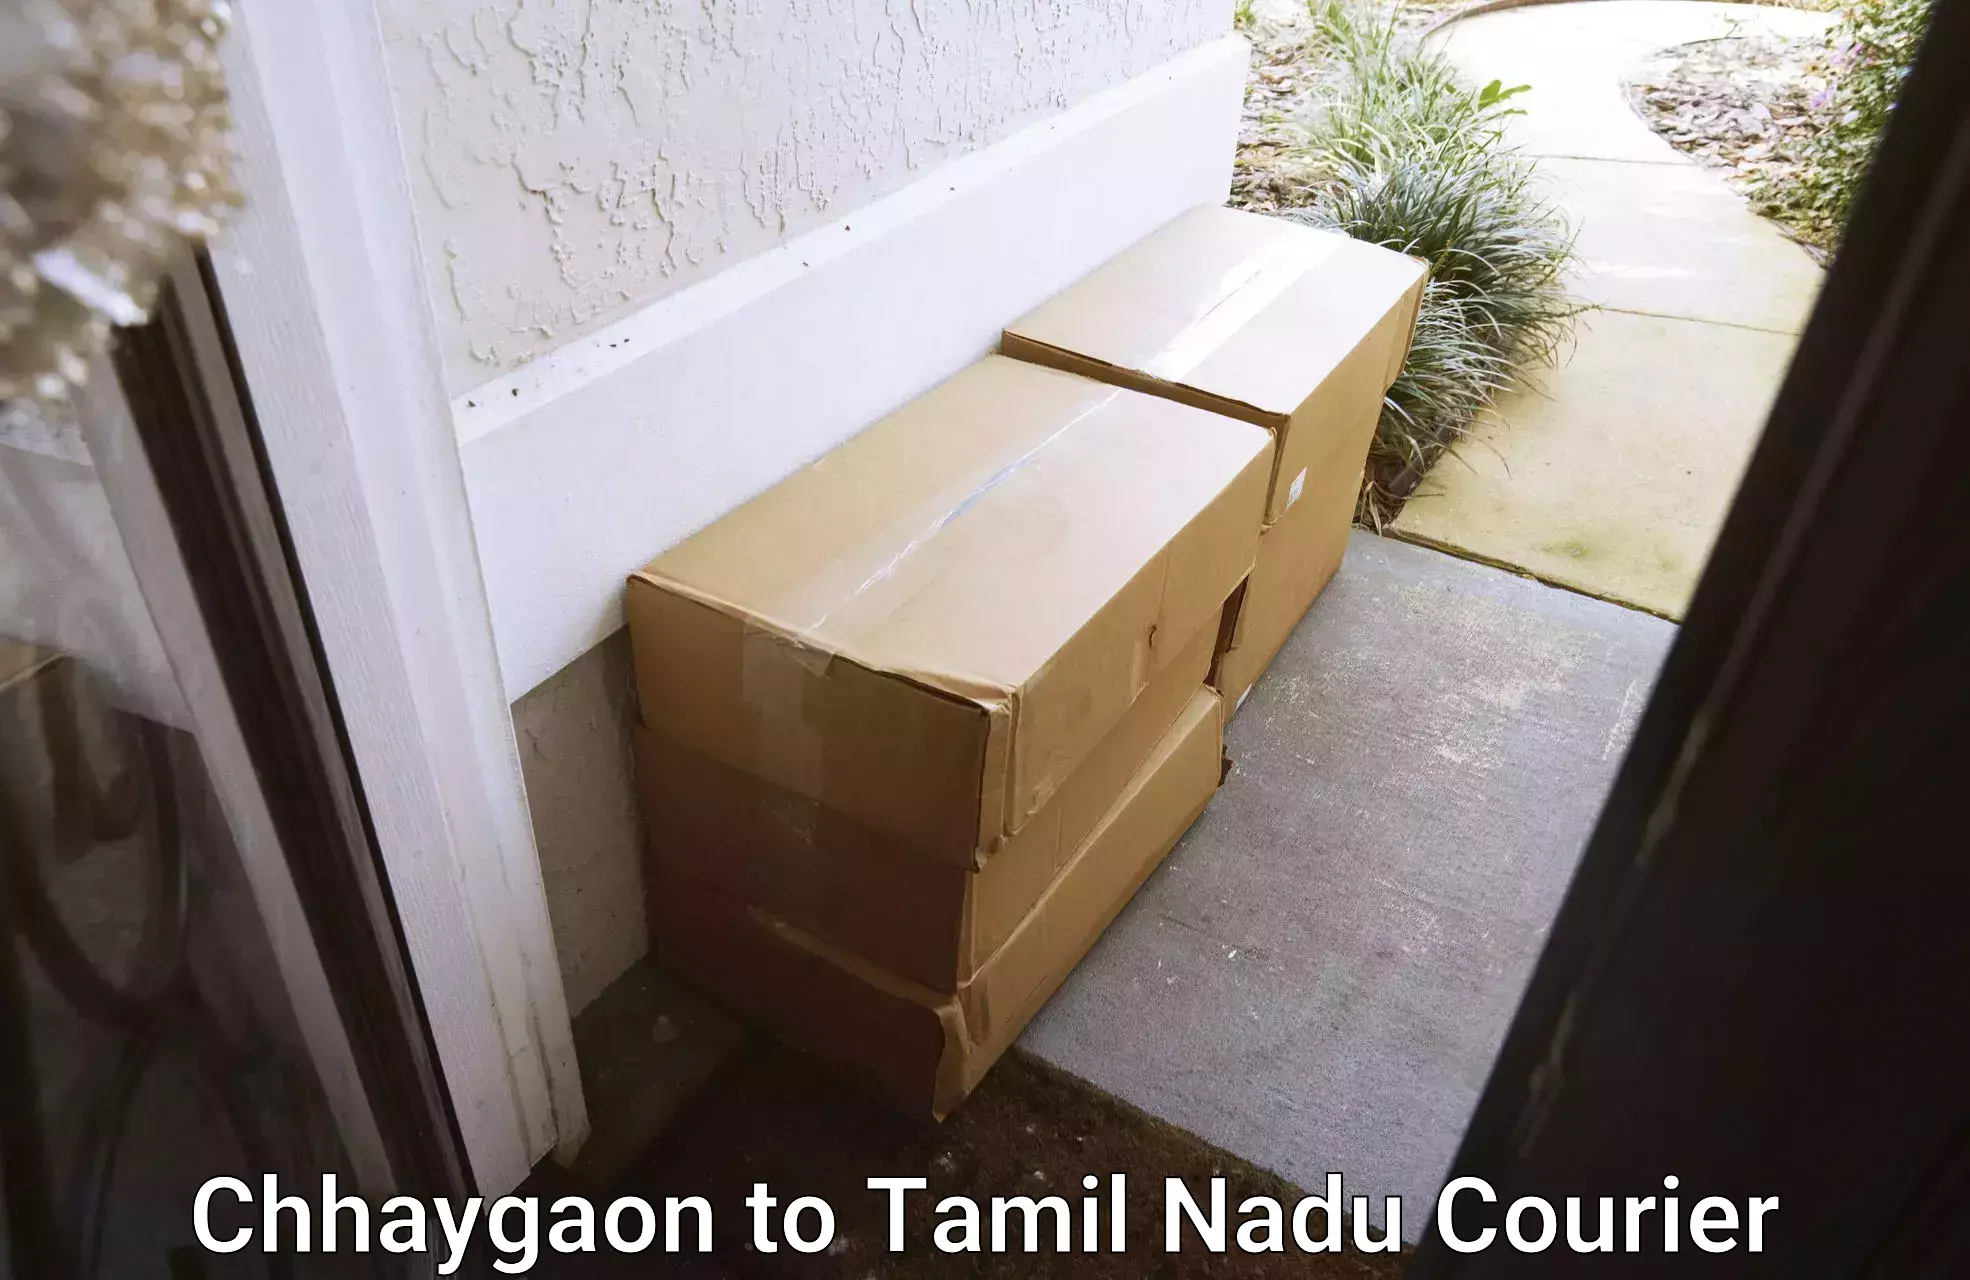 Affordable parcel service Chhaygaon to Pennagaram